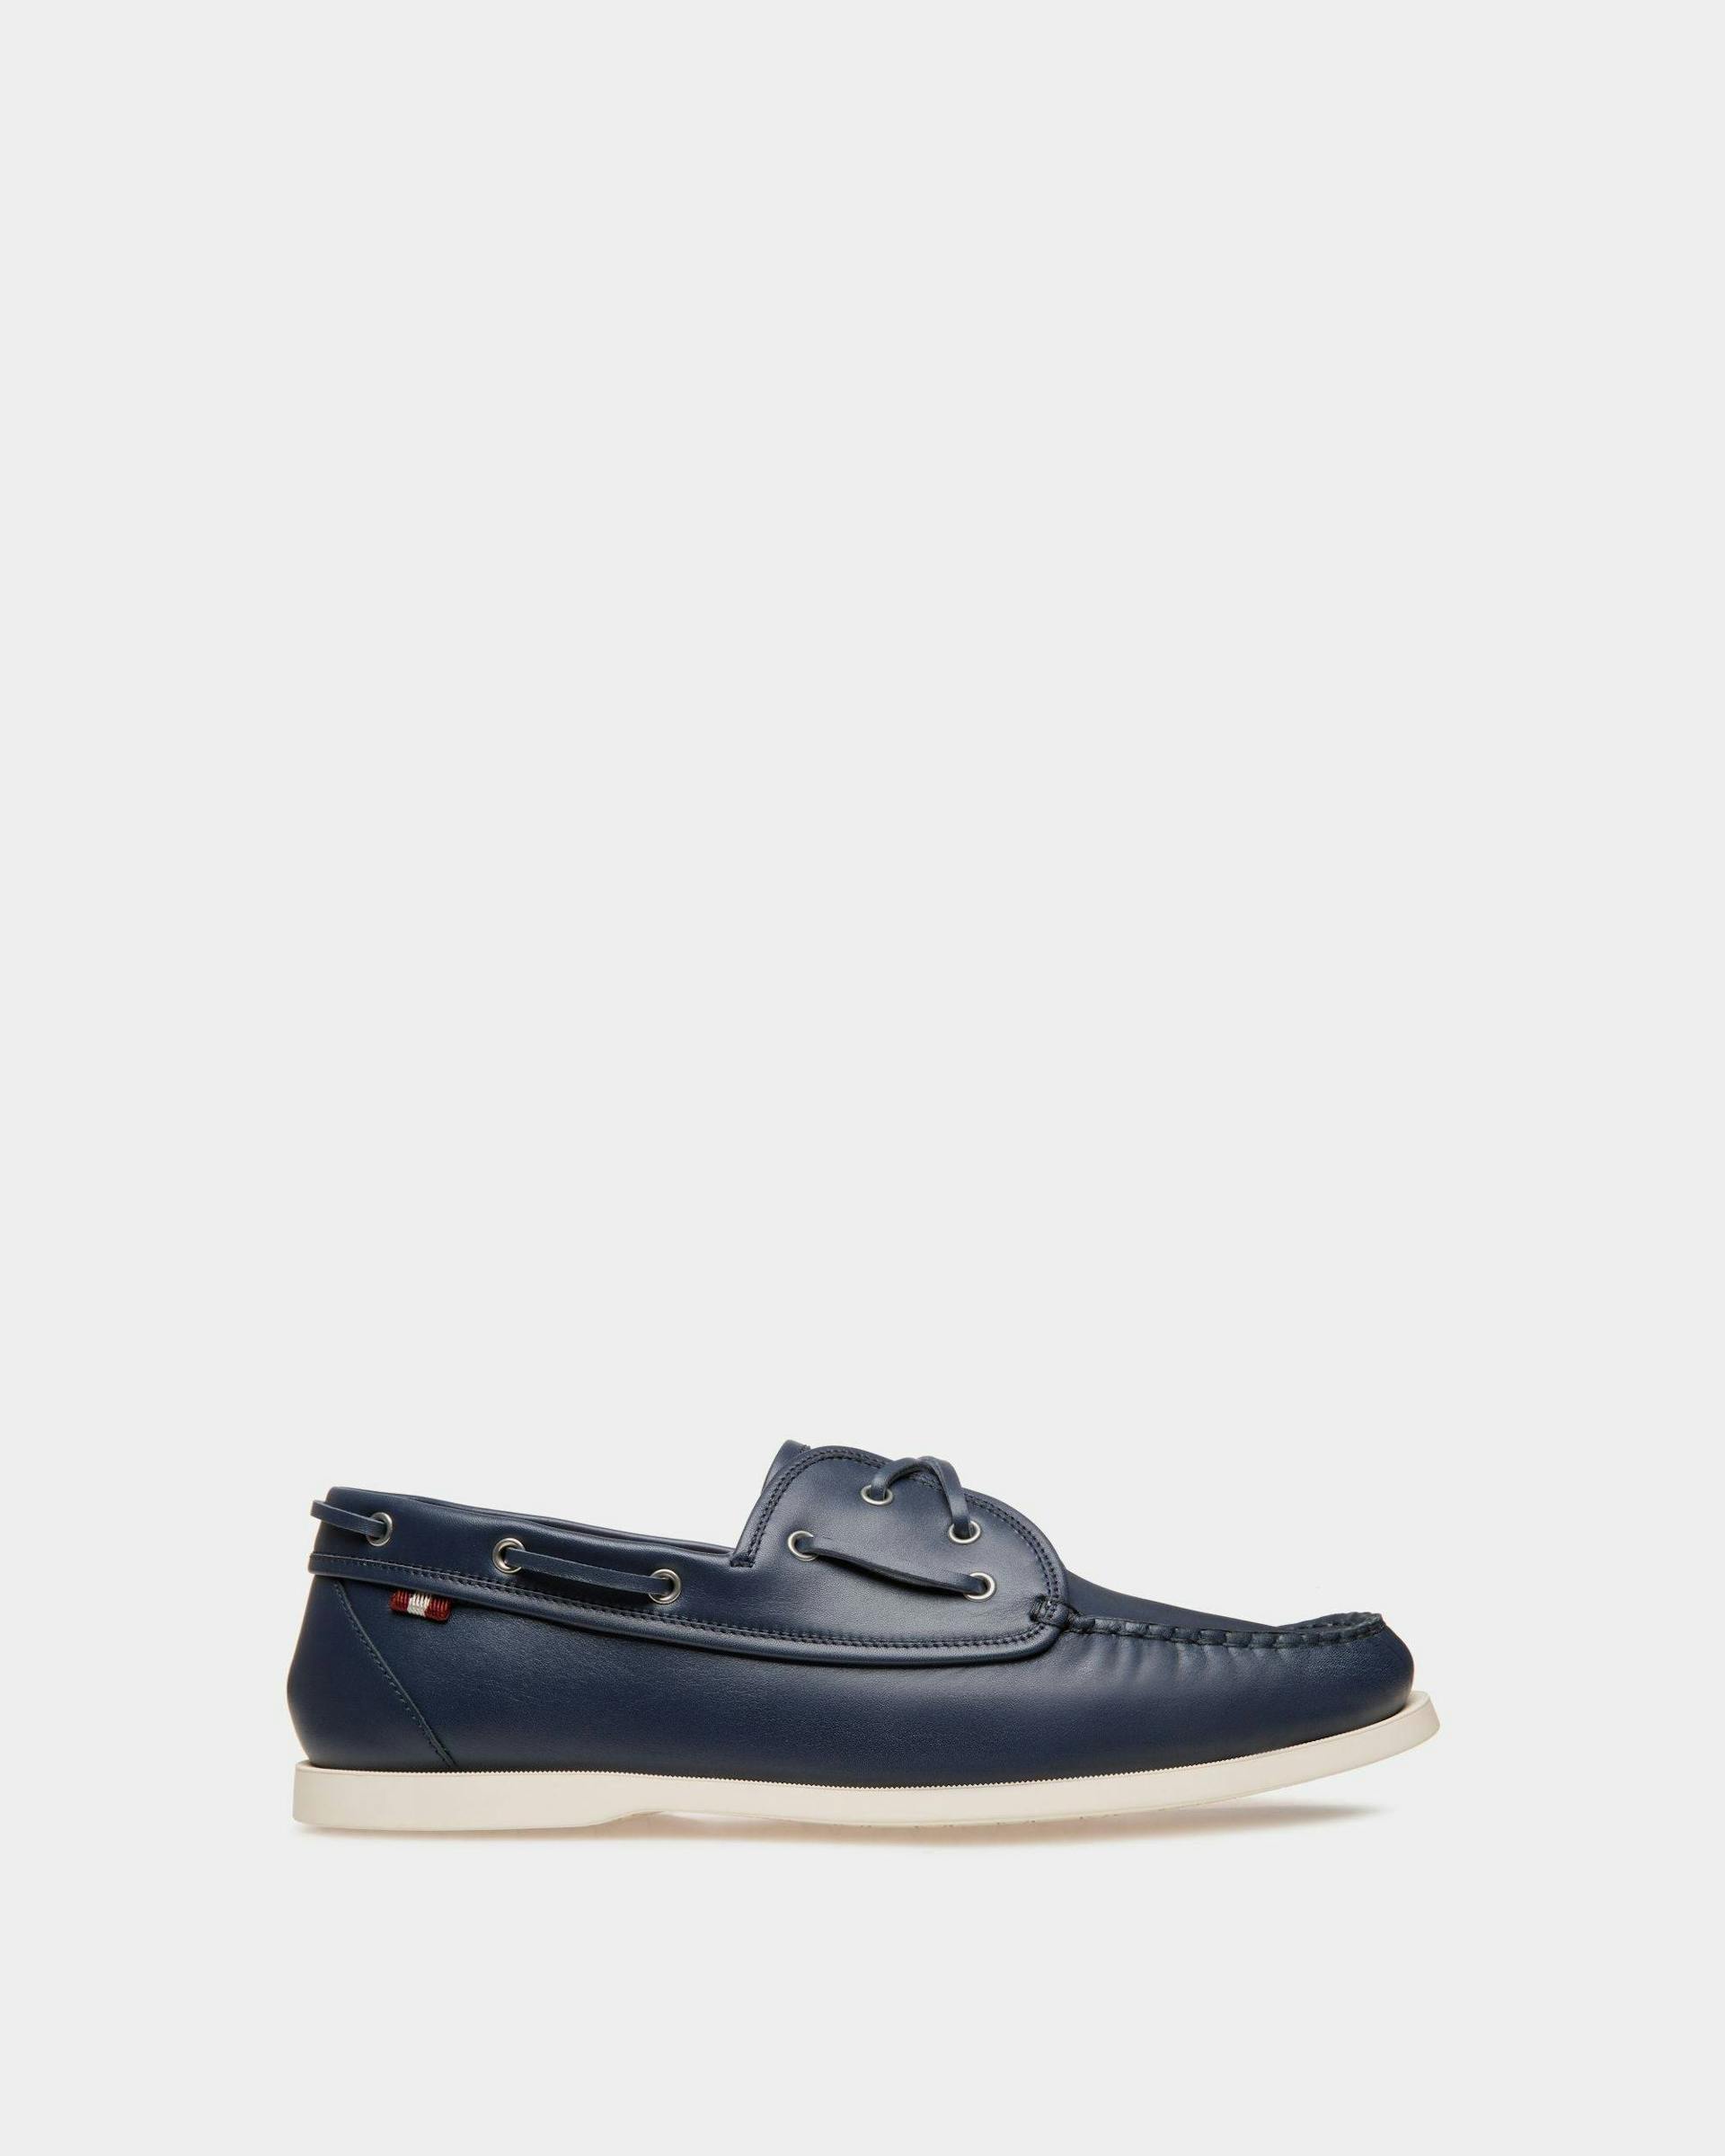 Men's Nelson Loafer in Leather | Bally | Still Life Side